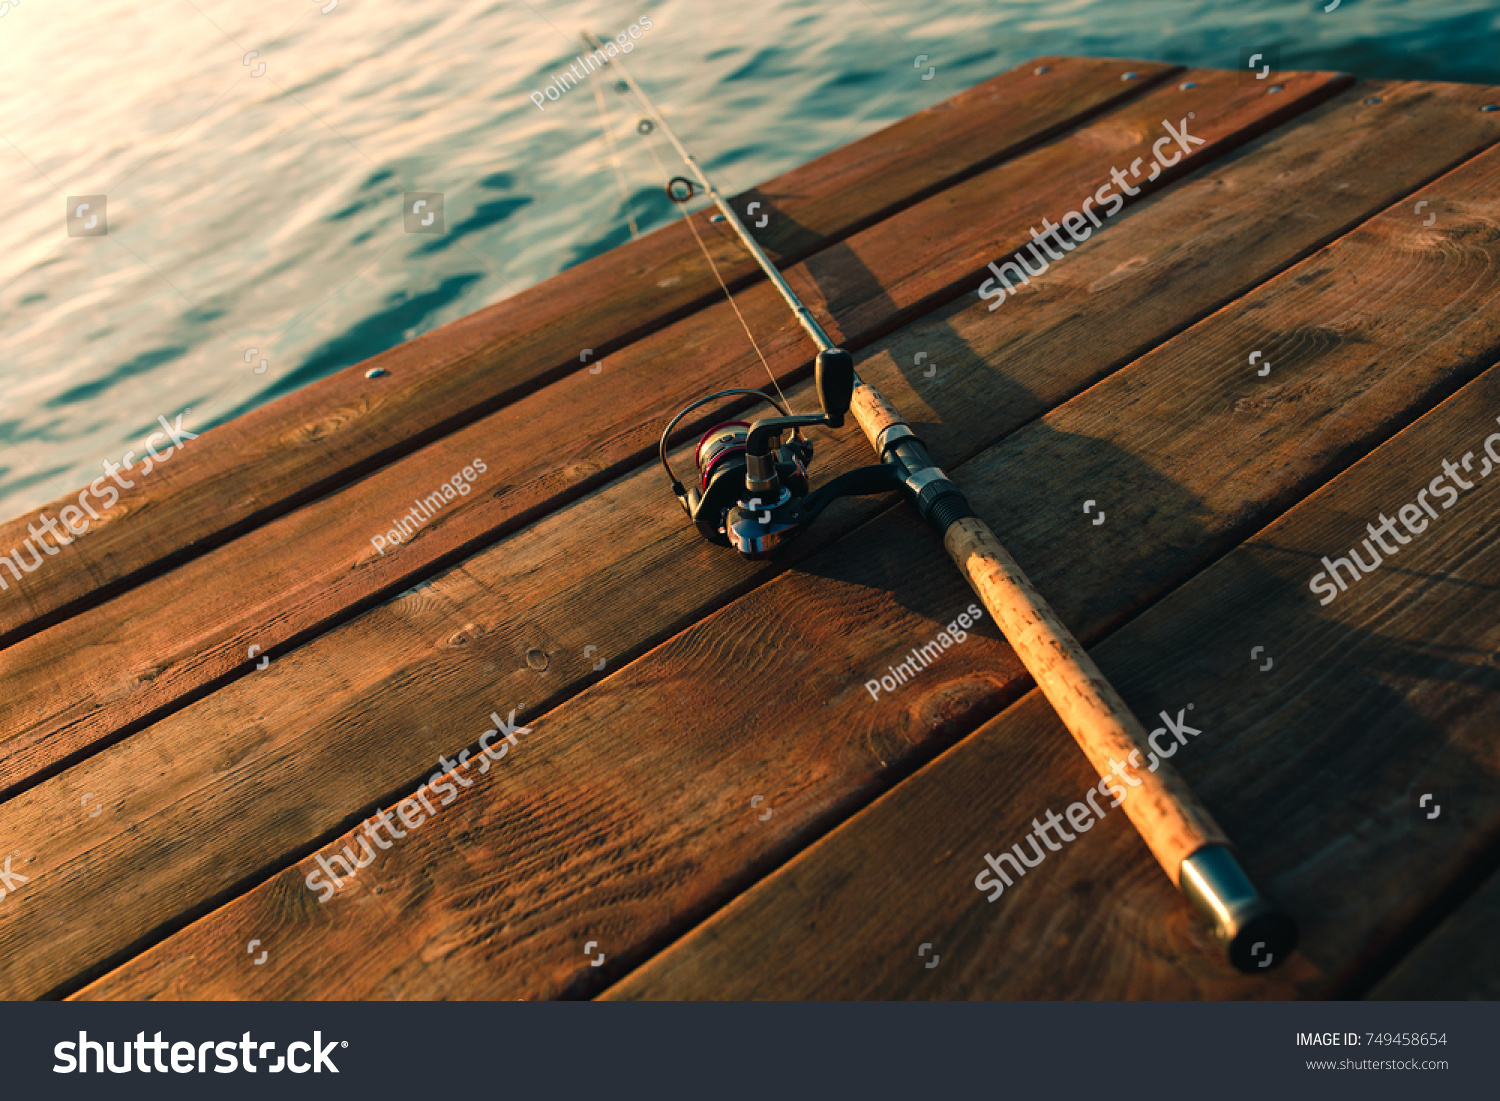 Fishing rod on a wooden dock. #749458654